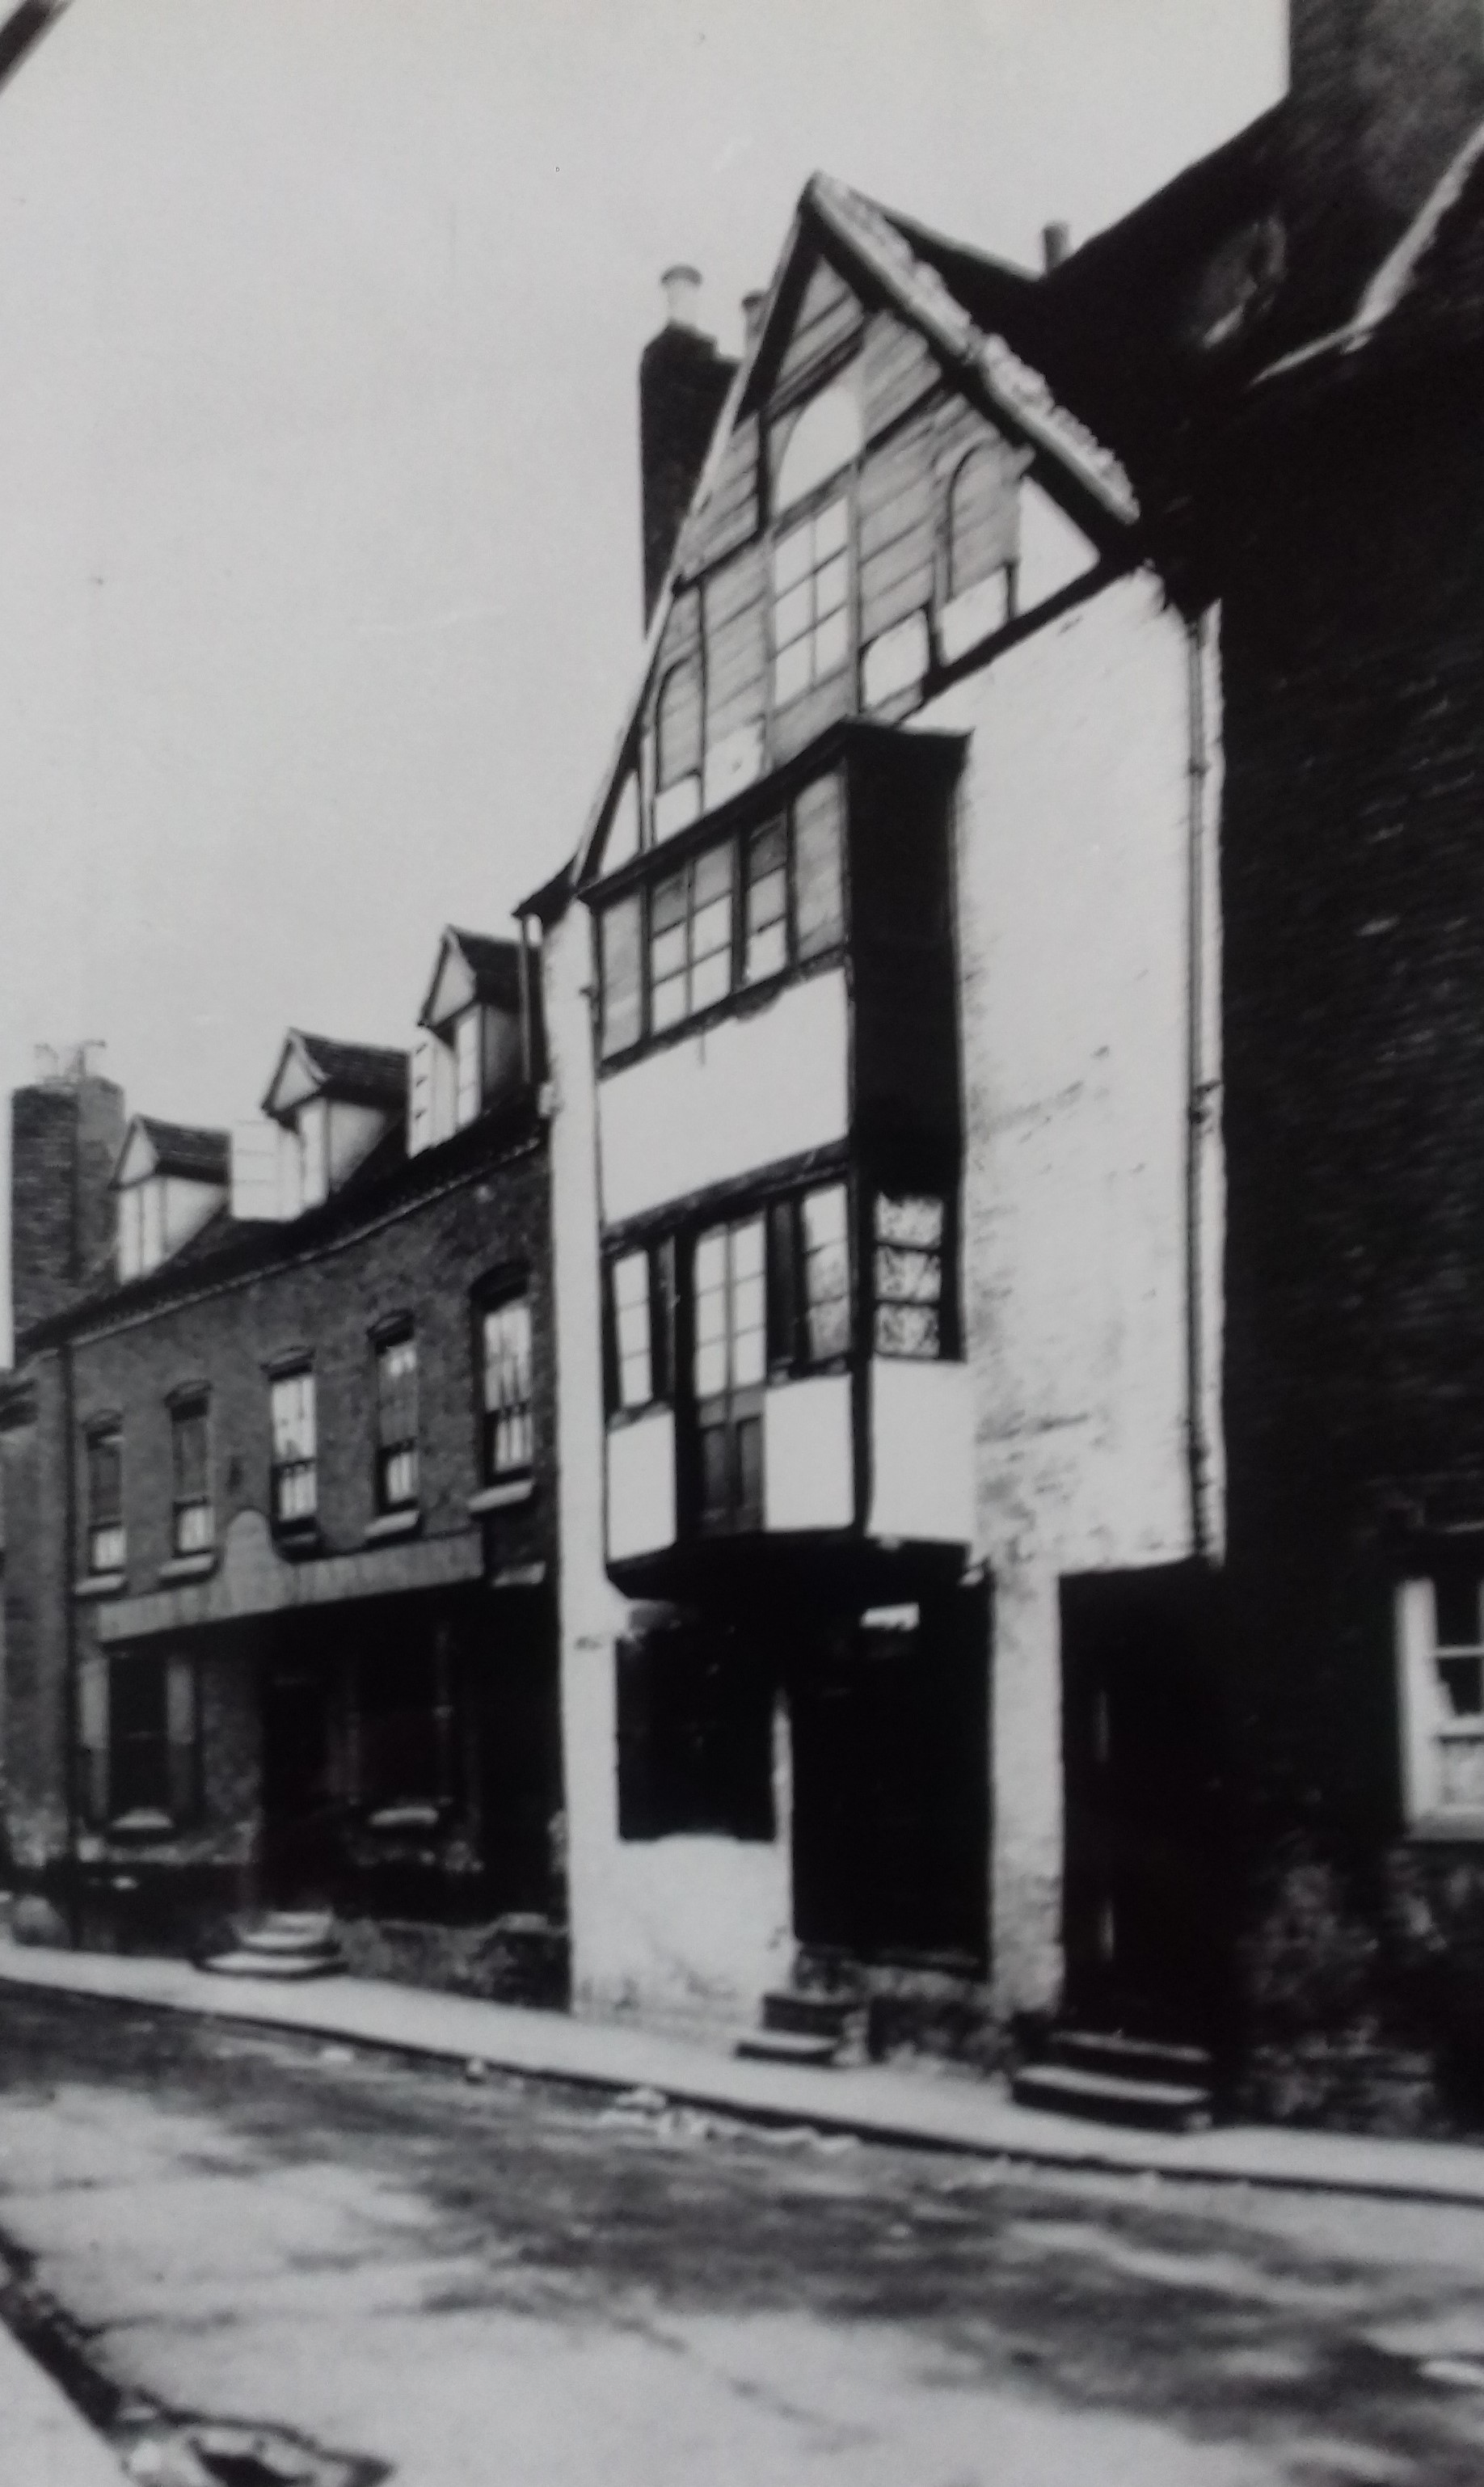 Birdport in 1910 with the Glovers Arms in Powick Lane in the left